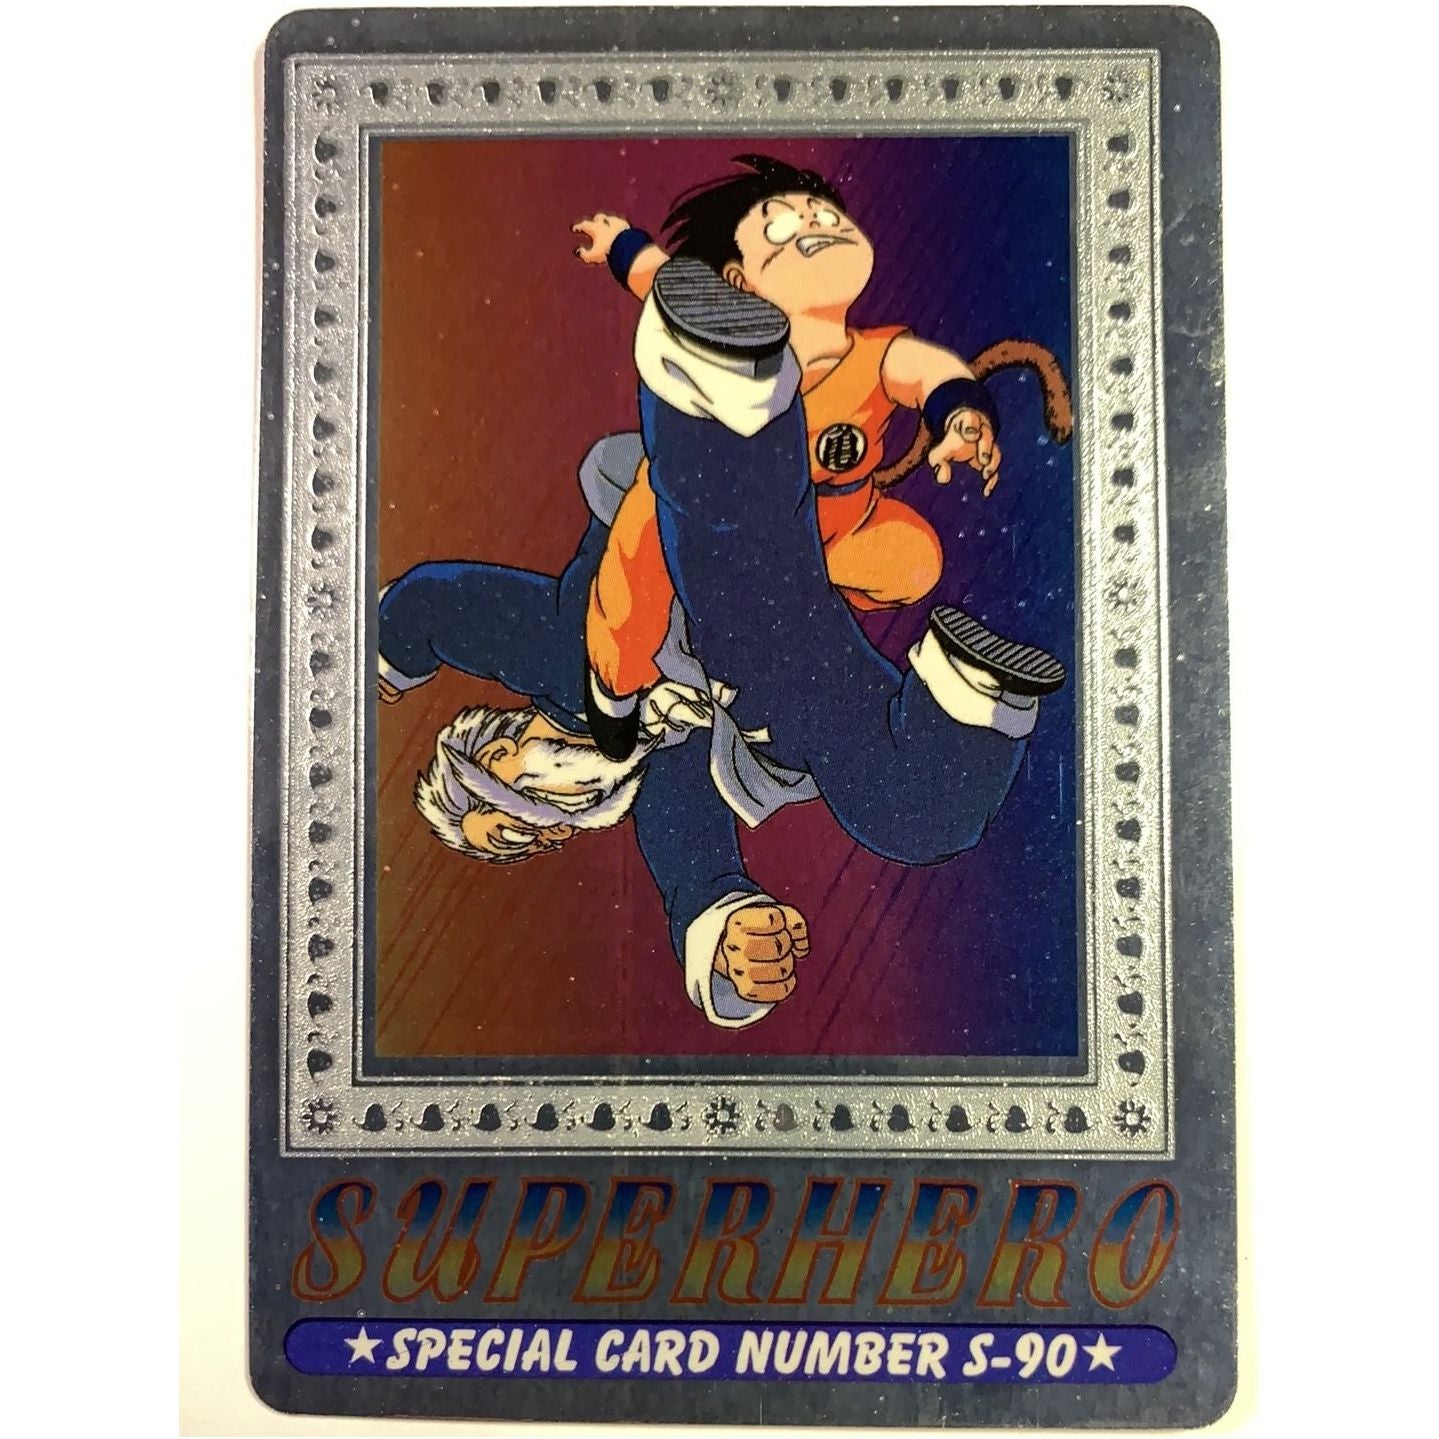  1995 Cardass Adali Super Hero Special Card S-90 Silver Foil Master Roshi V Goku (Boots to the Face)  Local Legends Cards & Collectibles